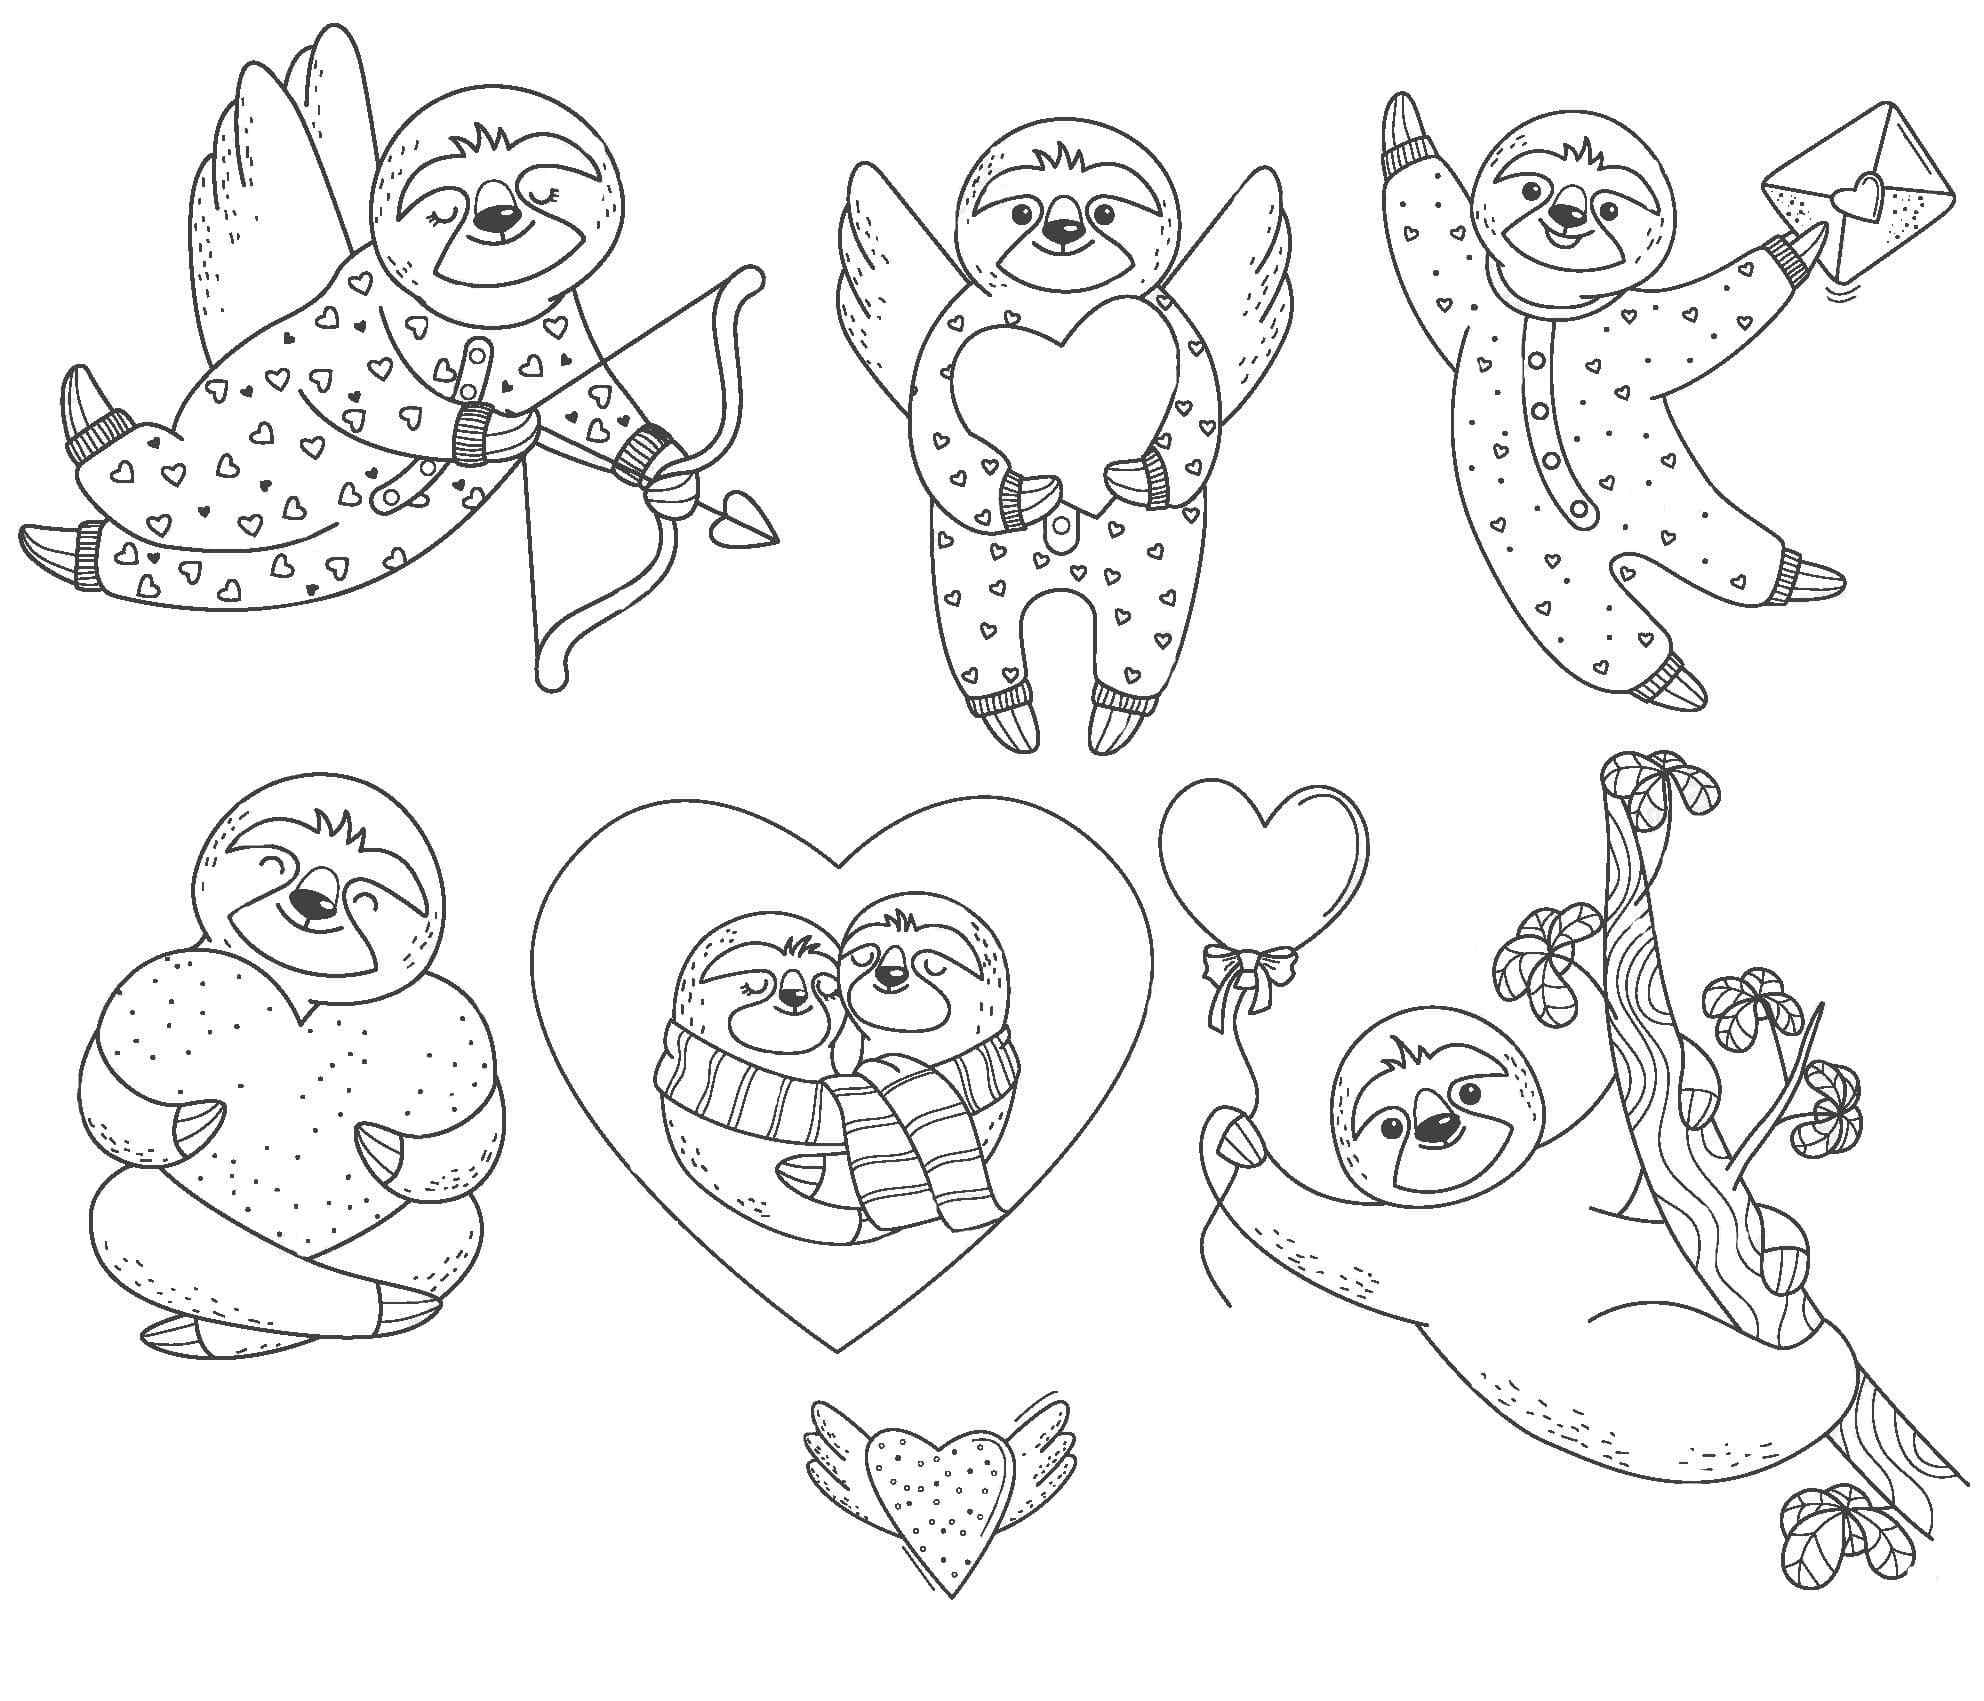 Many Different Sloths With Hearts